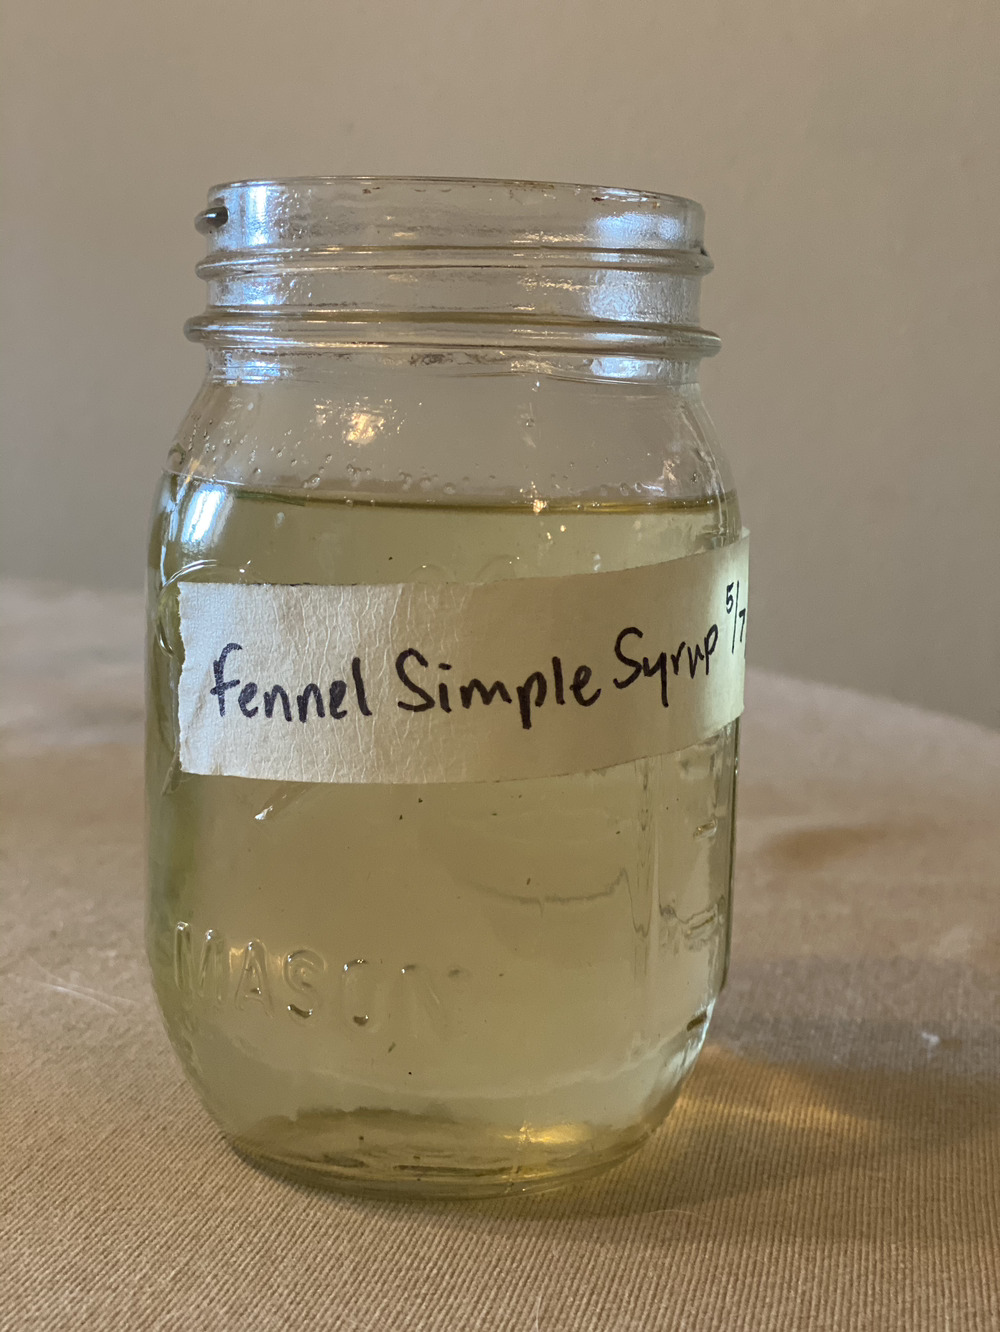 Fennel simple syrup